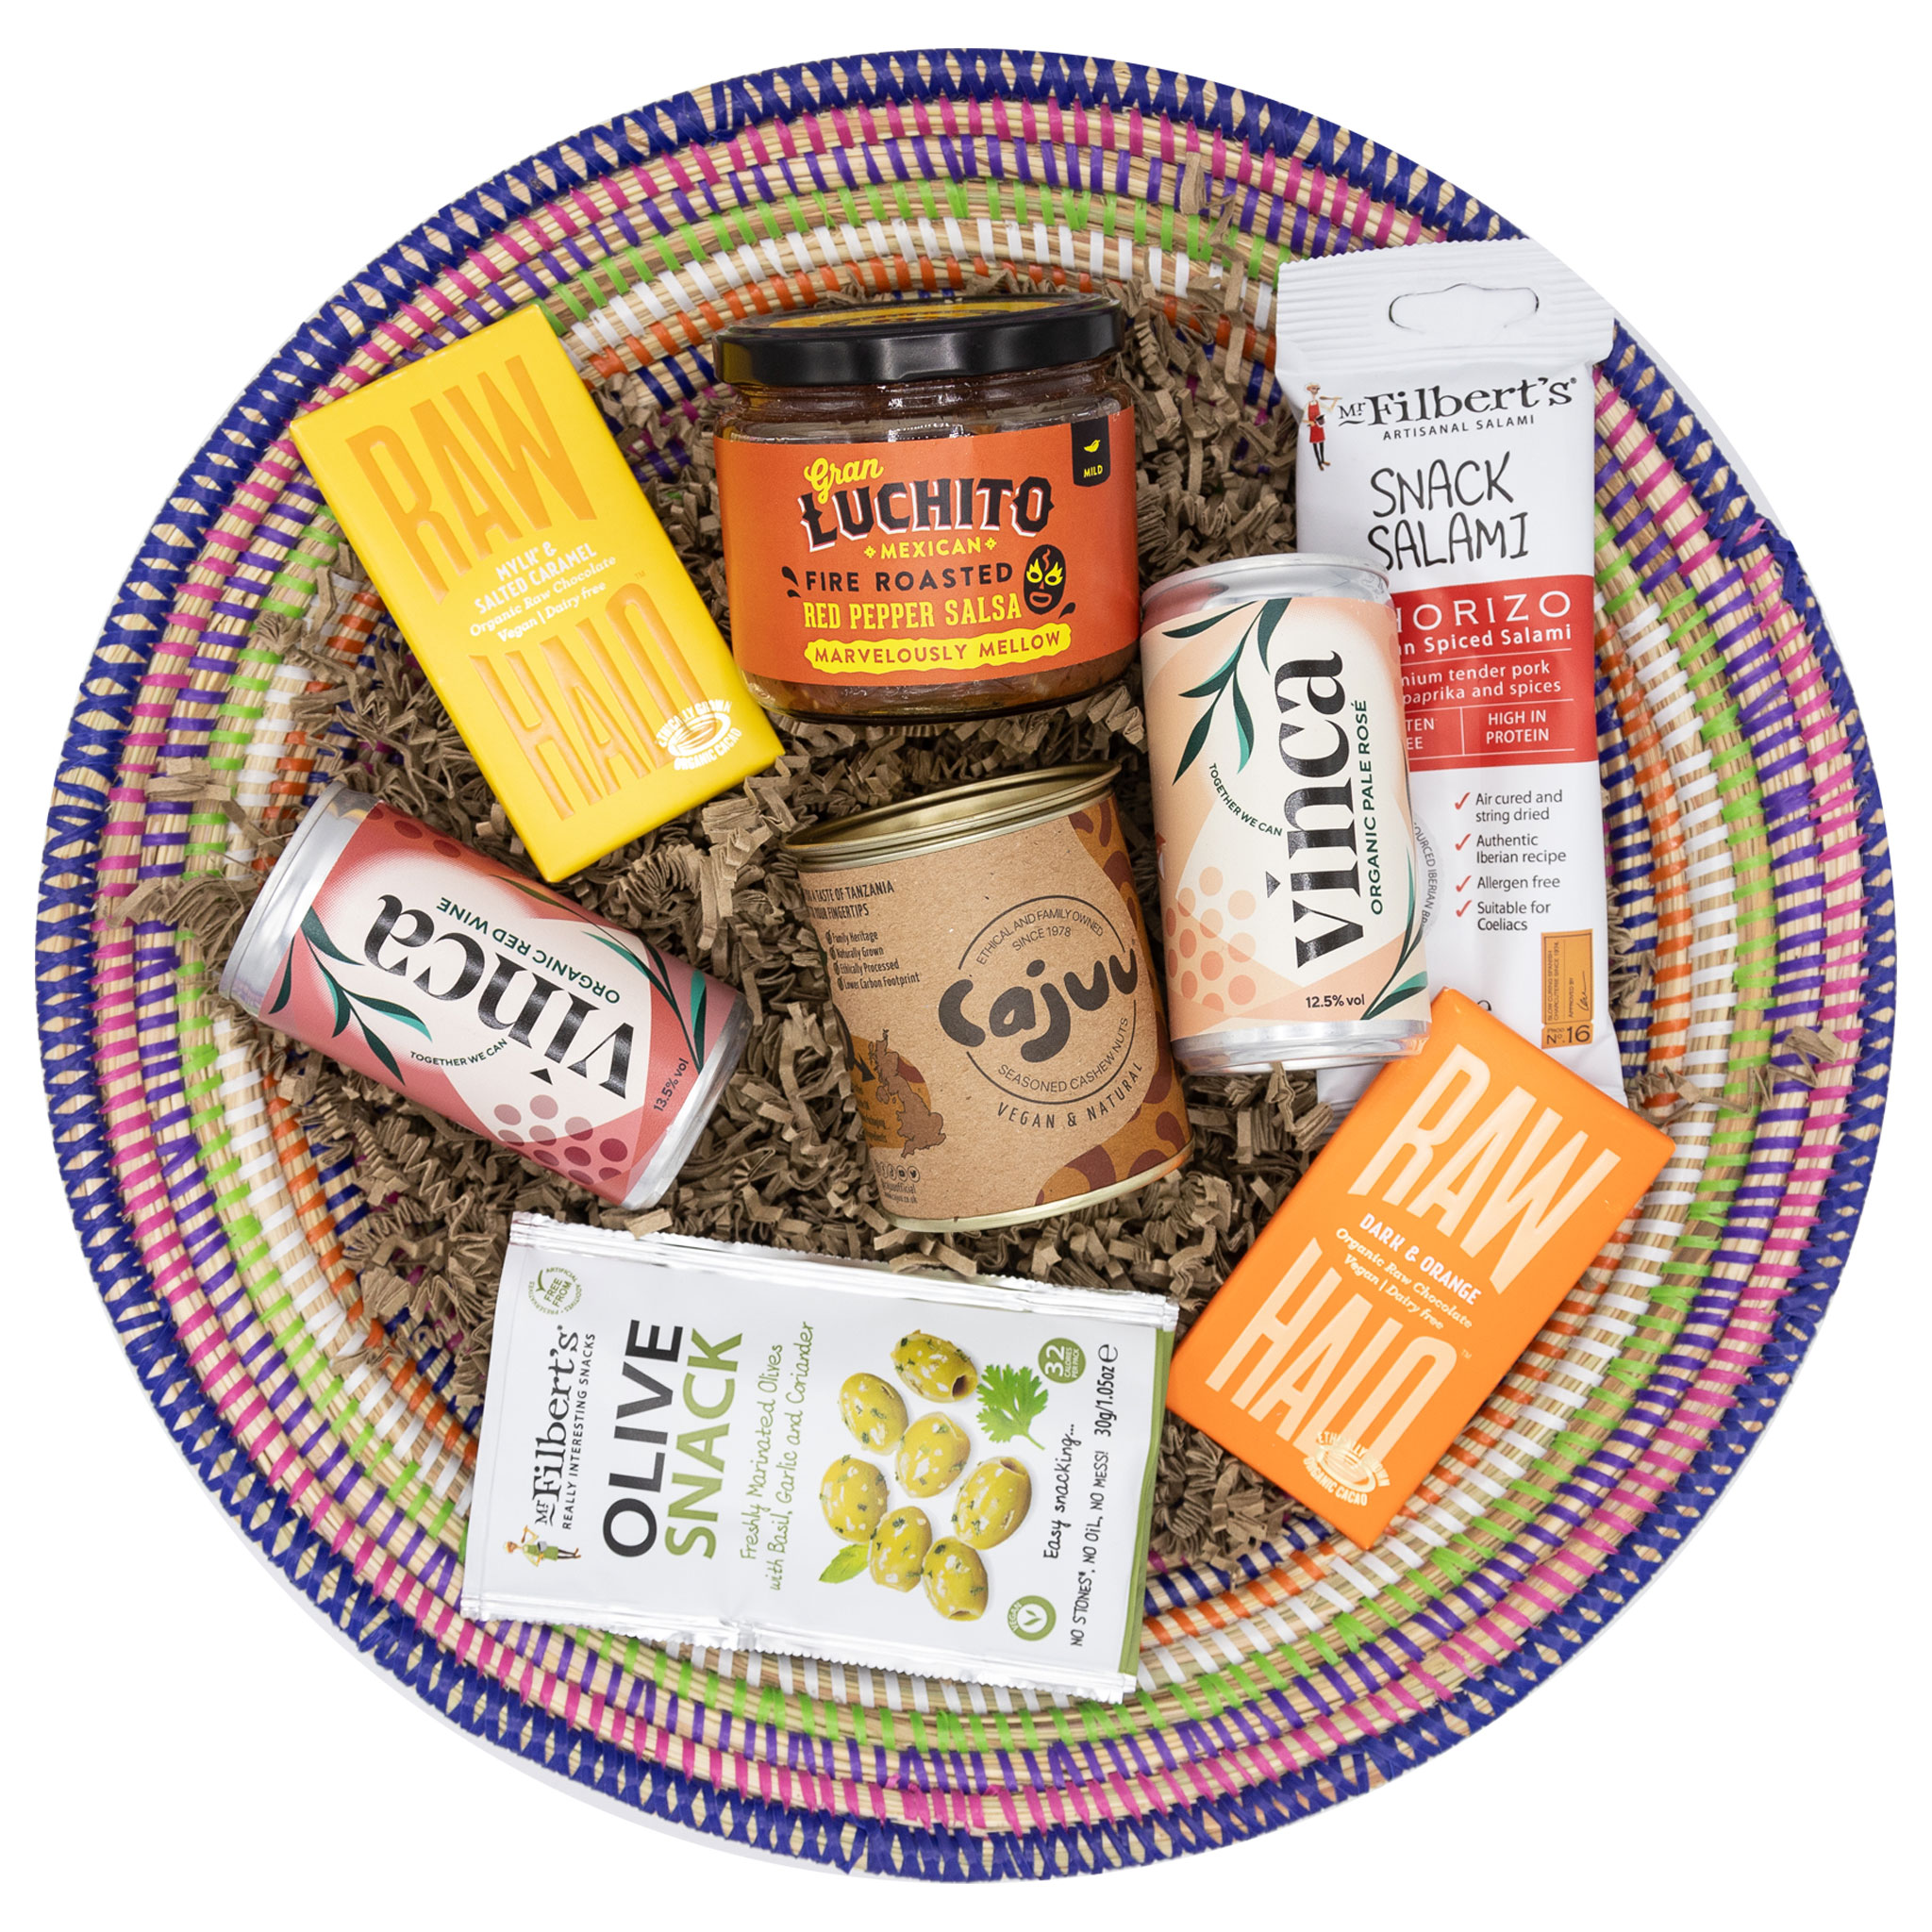 A selection of delectable treats sourced from responsible and sustainable producers presented in a handwoven African basket